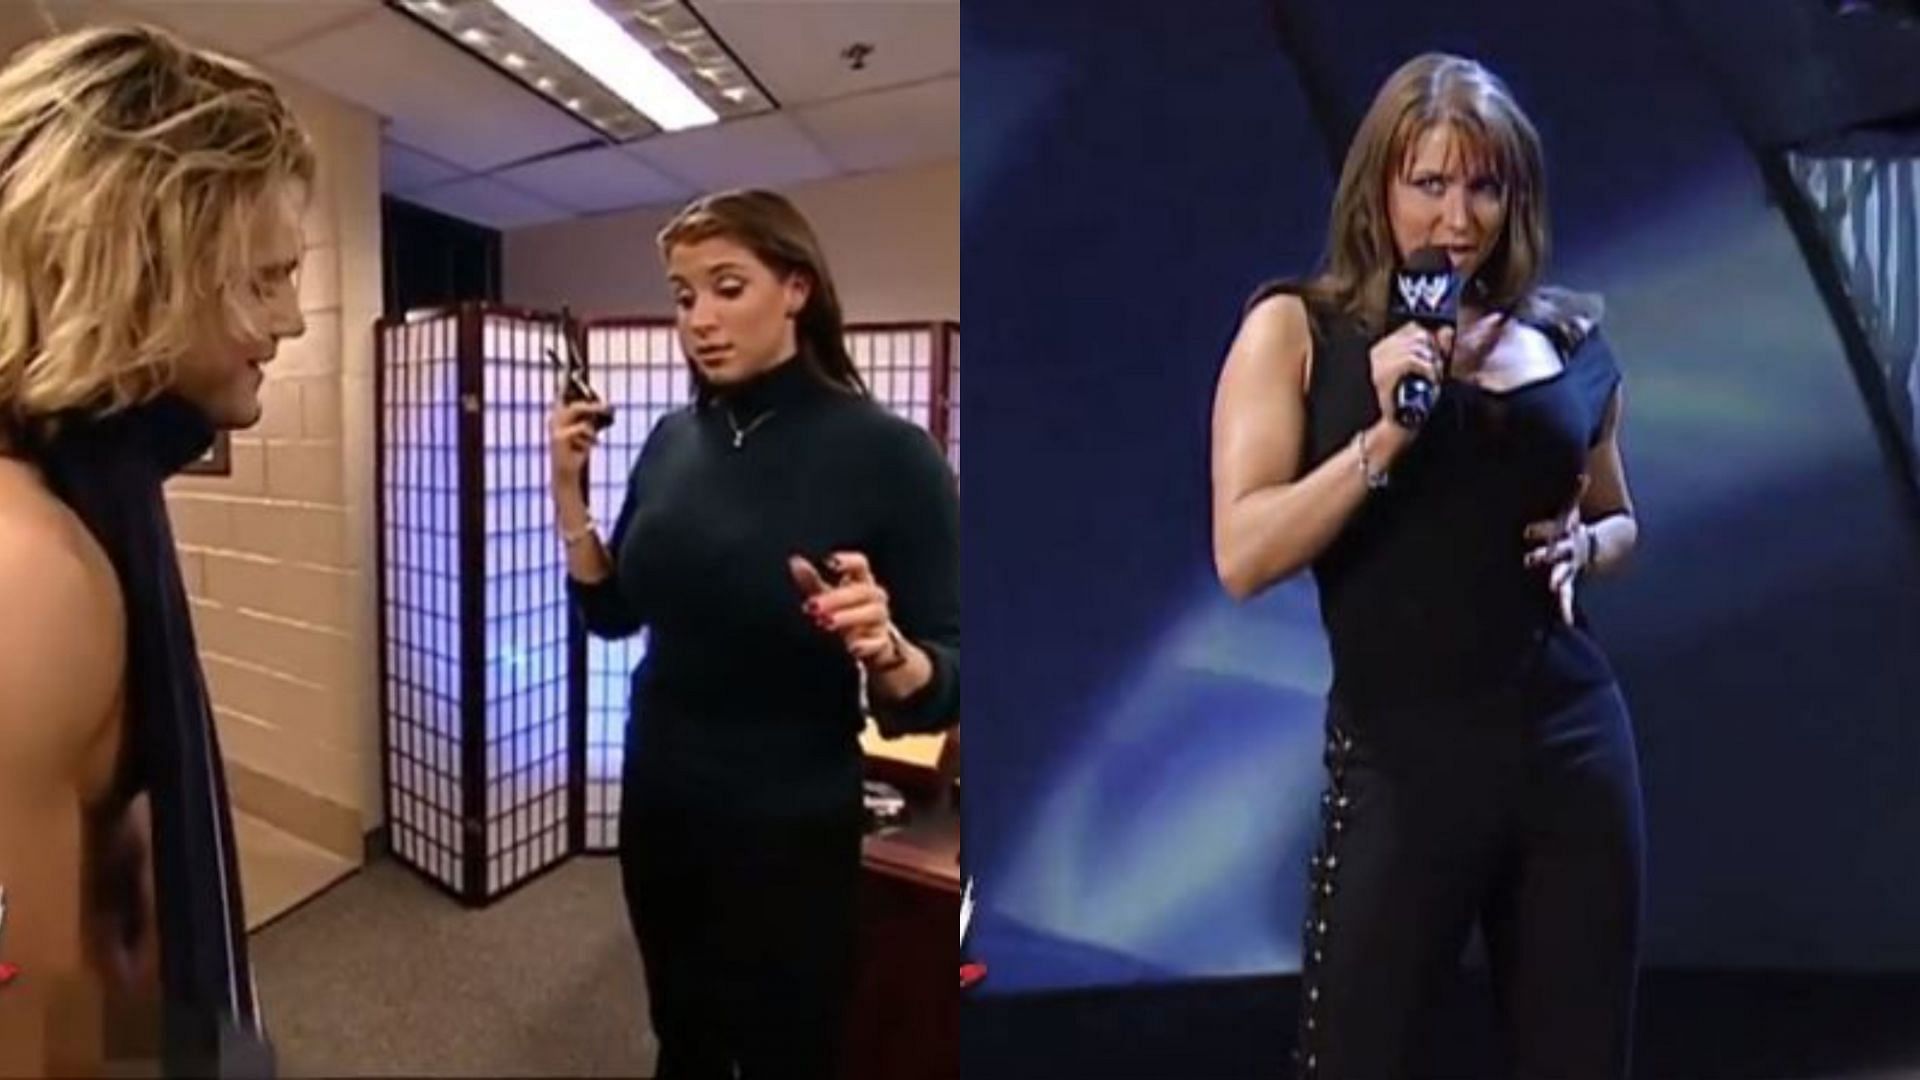 Naked pictures of stephanie mcmahon